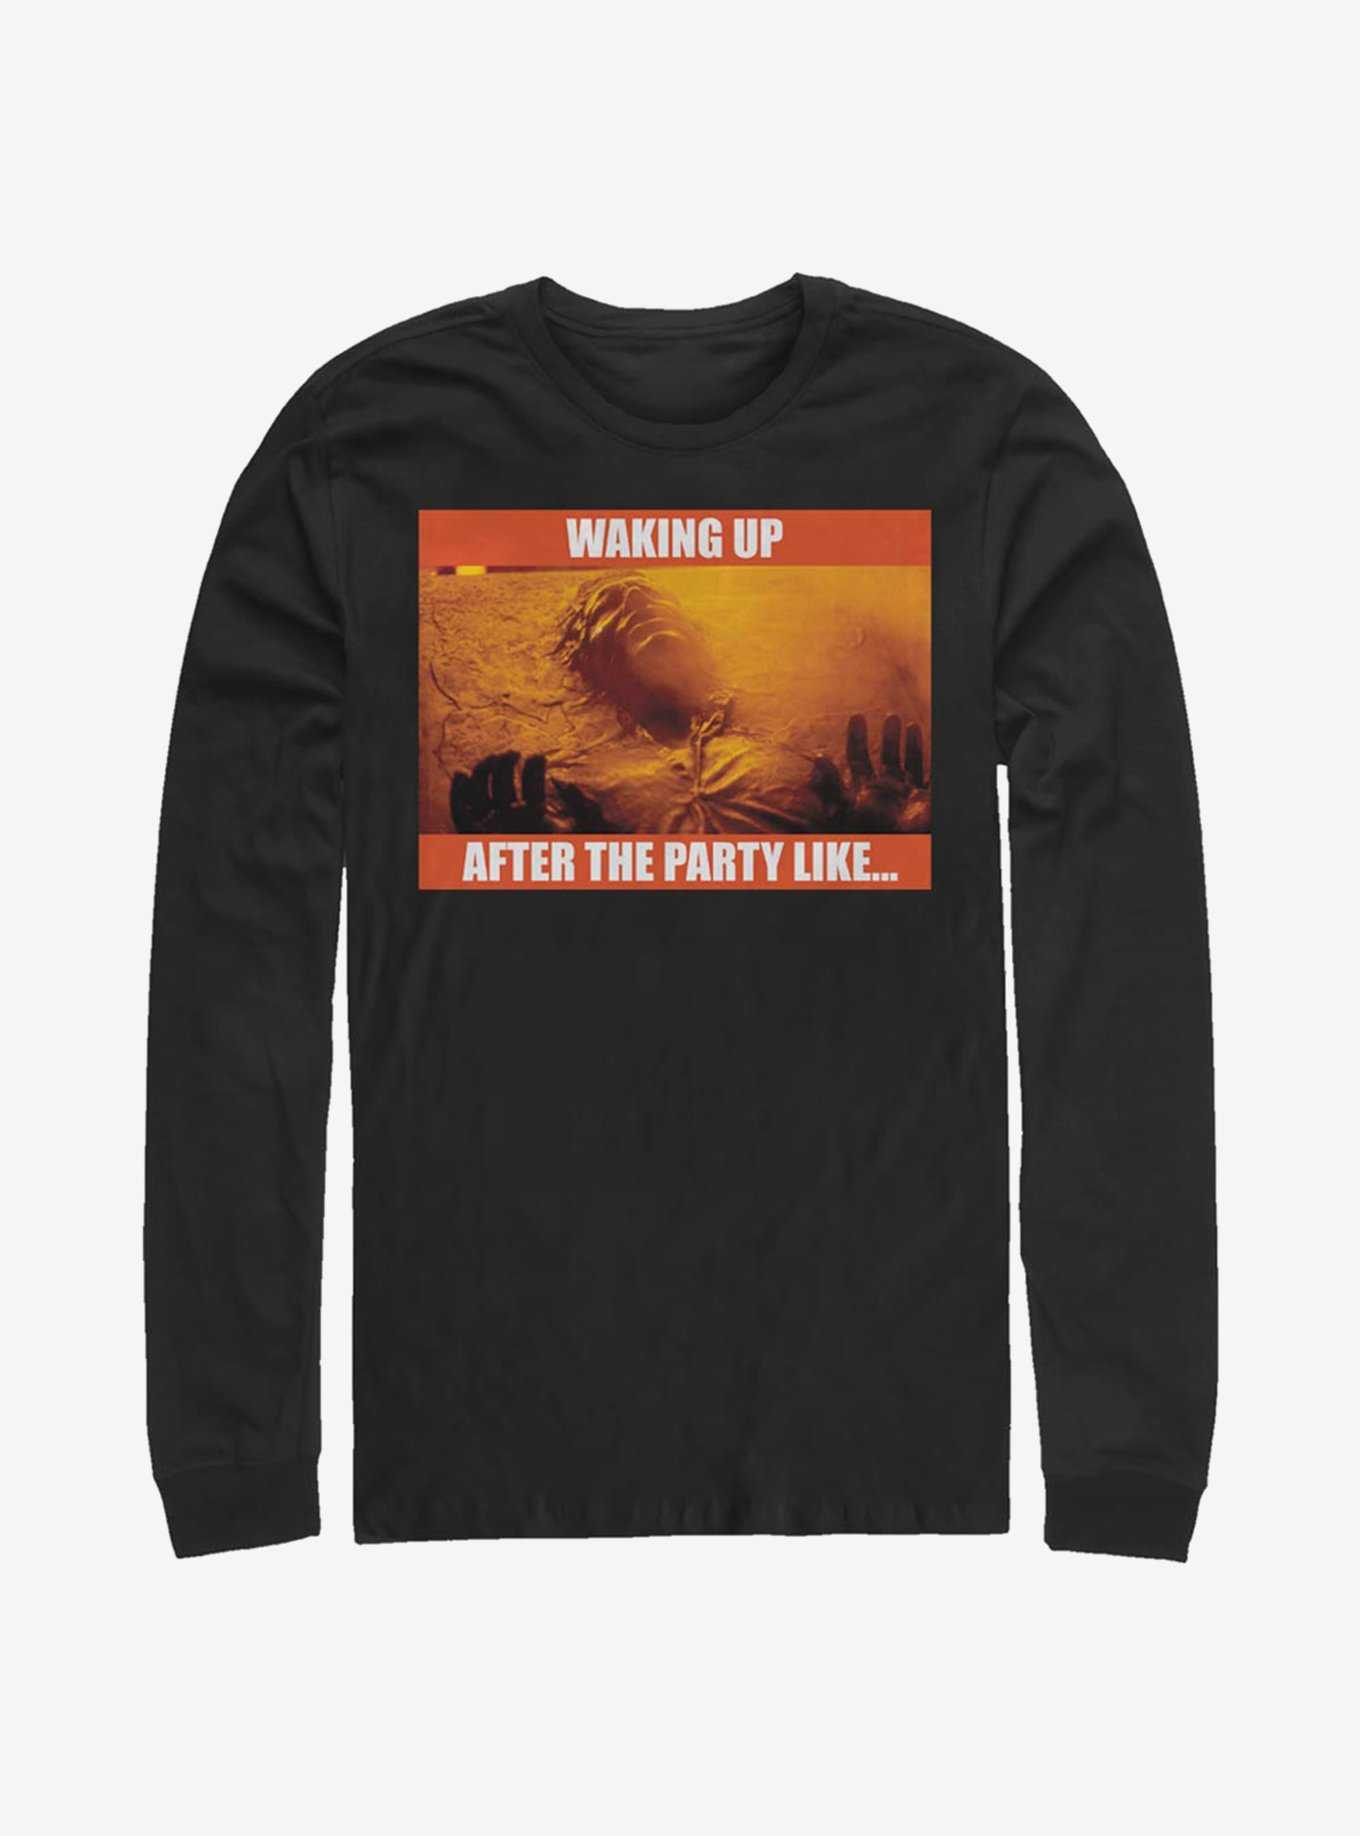 Star Wars Waking Up After The Party Long-Sleeve T-Shirt, , hi-res